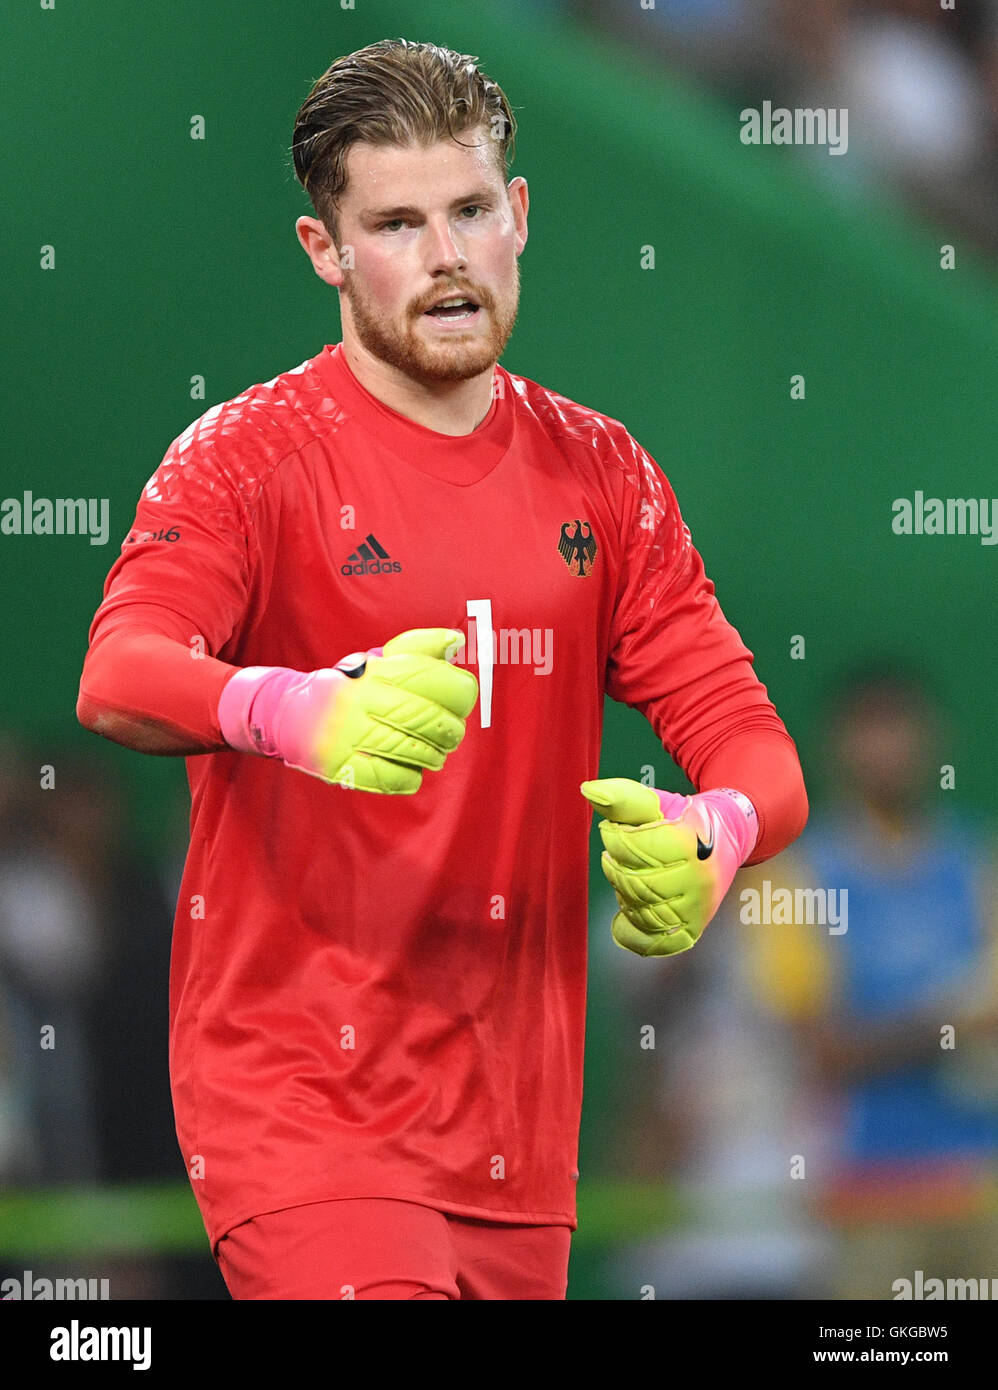 Rio de Janeiro, Brazil. 20th Aug, 2016. Goalkeeper Timo Horn of Germany reacts during the Men's soccer Gold Medal Match between Brazil and Germany during the Rio 2016 Olympic Games at the Maracana in Rio de Janeiro, Brazil, 20 August 2016. Photo: Soeren Stache/dpa/Alamy Live News Stock Photo